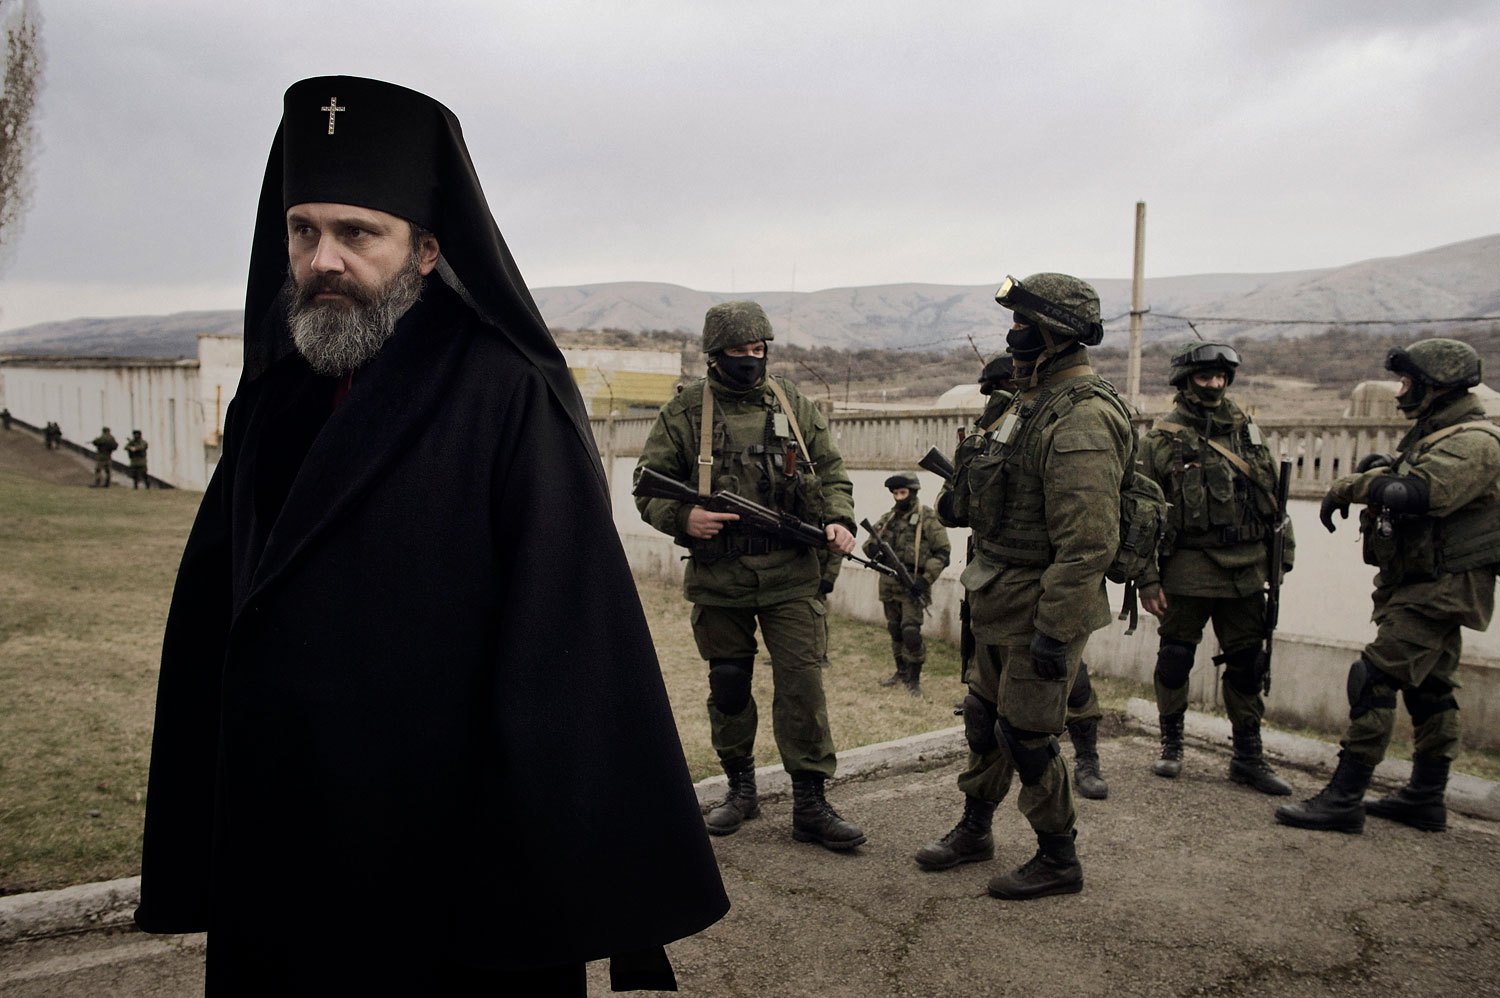 A priest stands next to troops in Perevalnoye on Sunday.